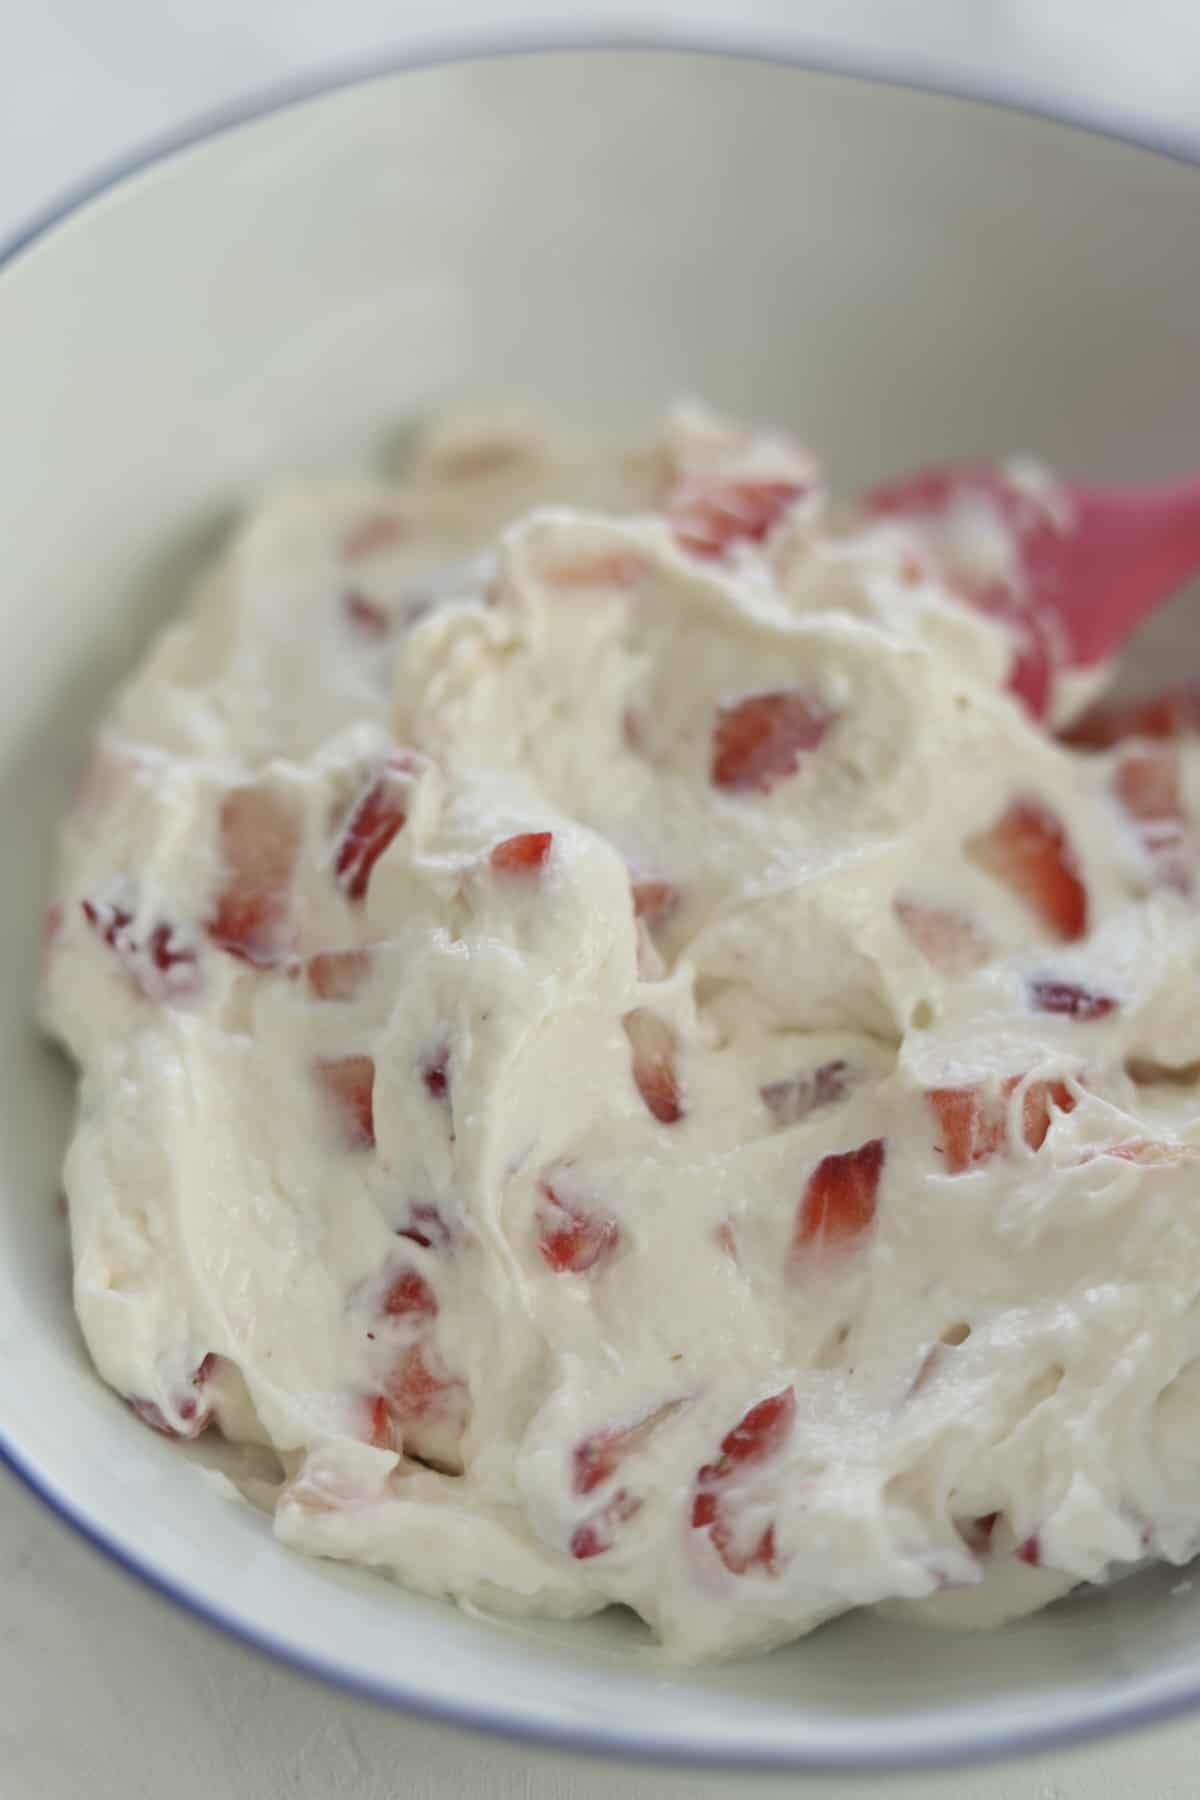 whipped cream mixture with chopped strawberries